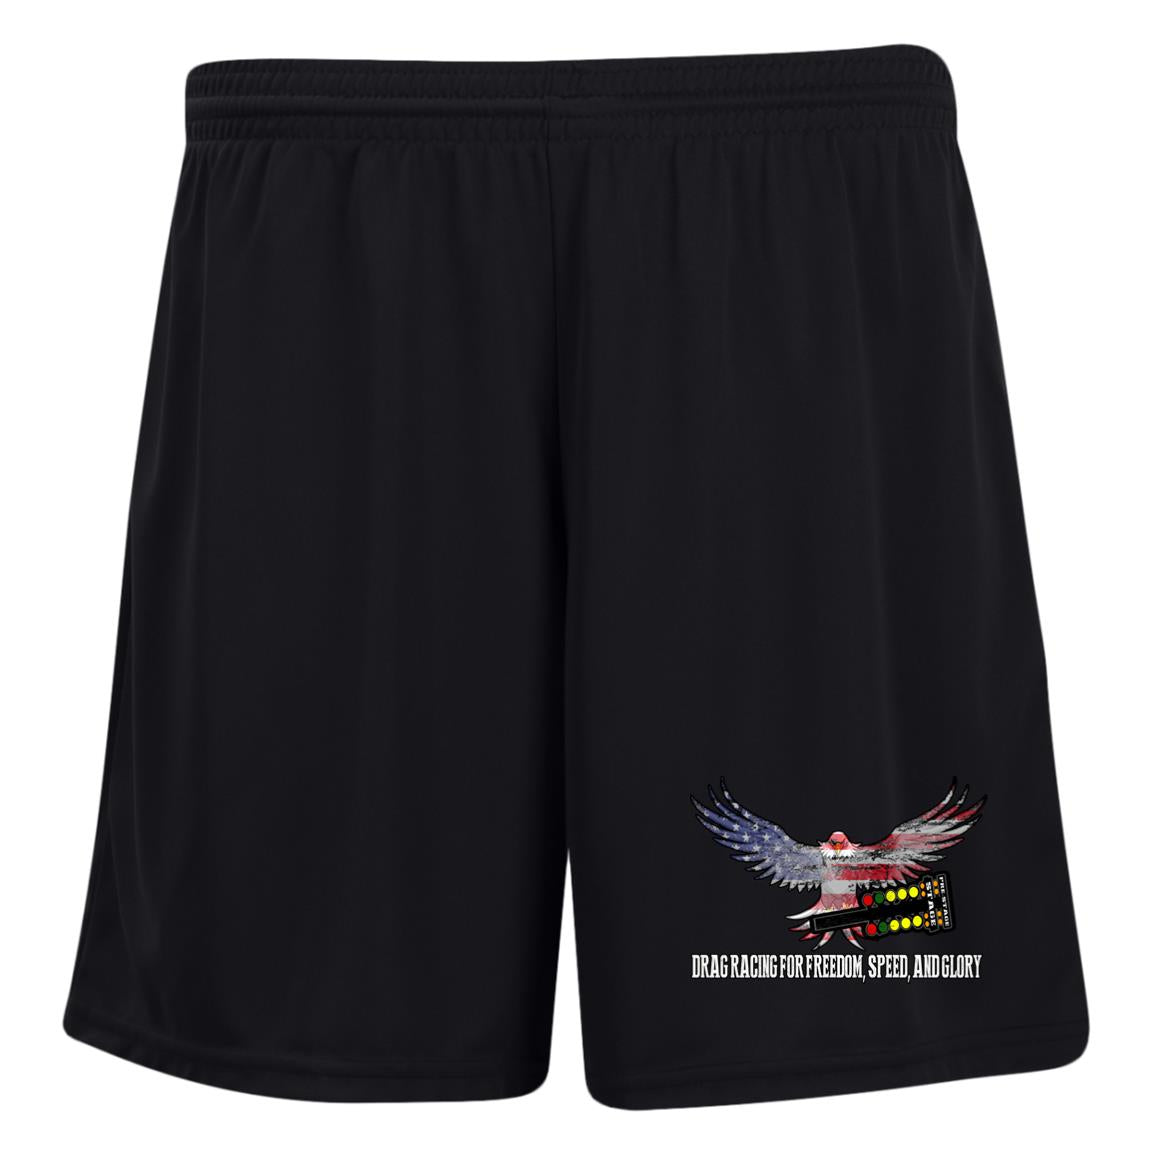 Drag Racing for Freedom, Speed, and Glory Ladies' Moisture-Wicking 7 inch Inseam Training Shorts